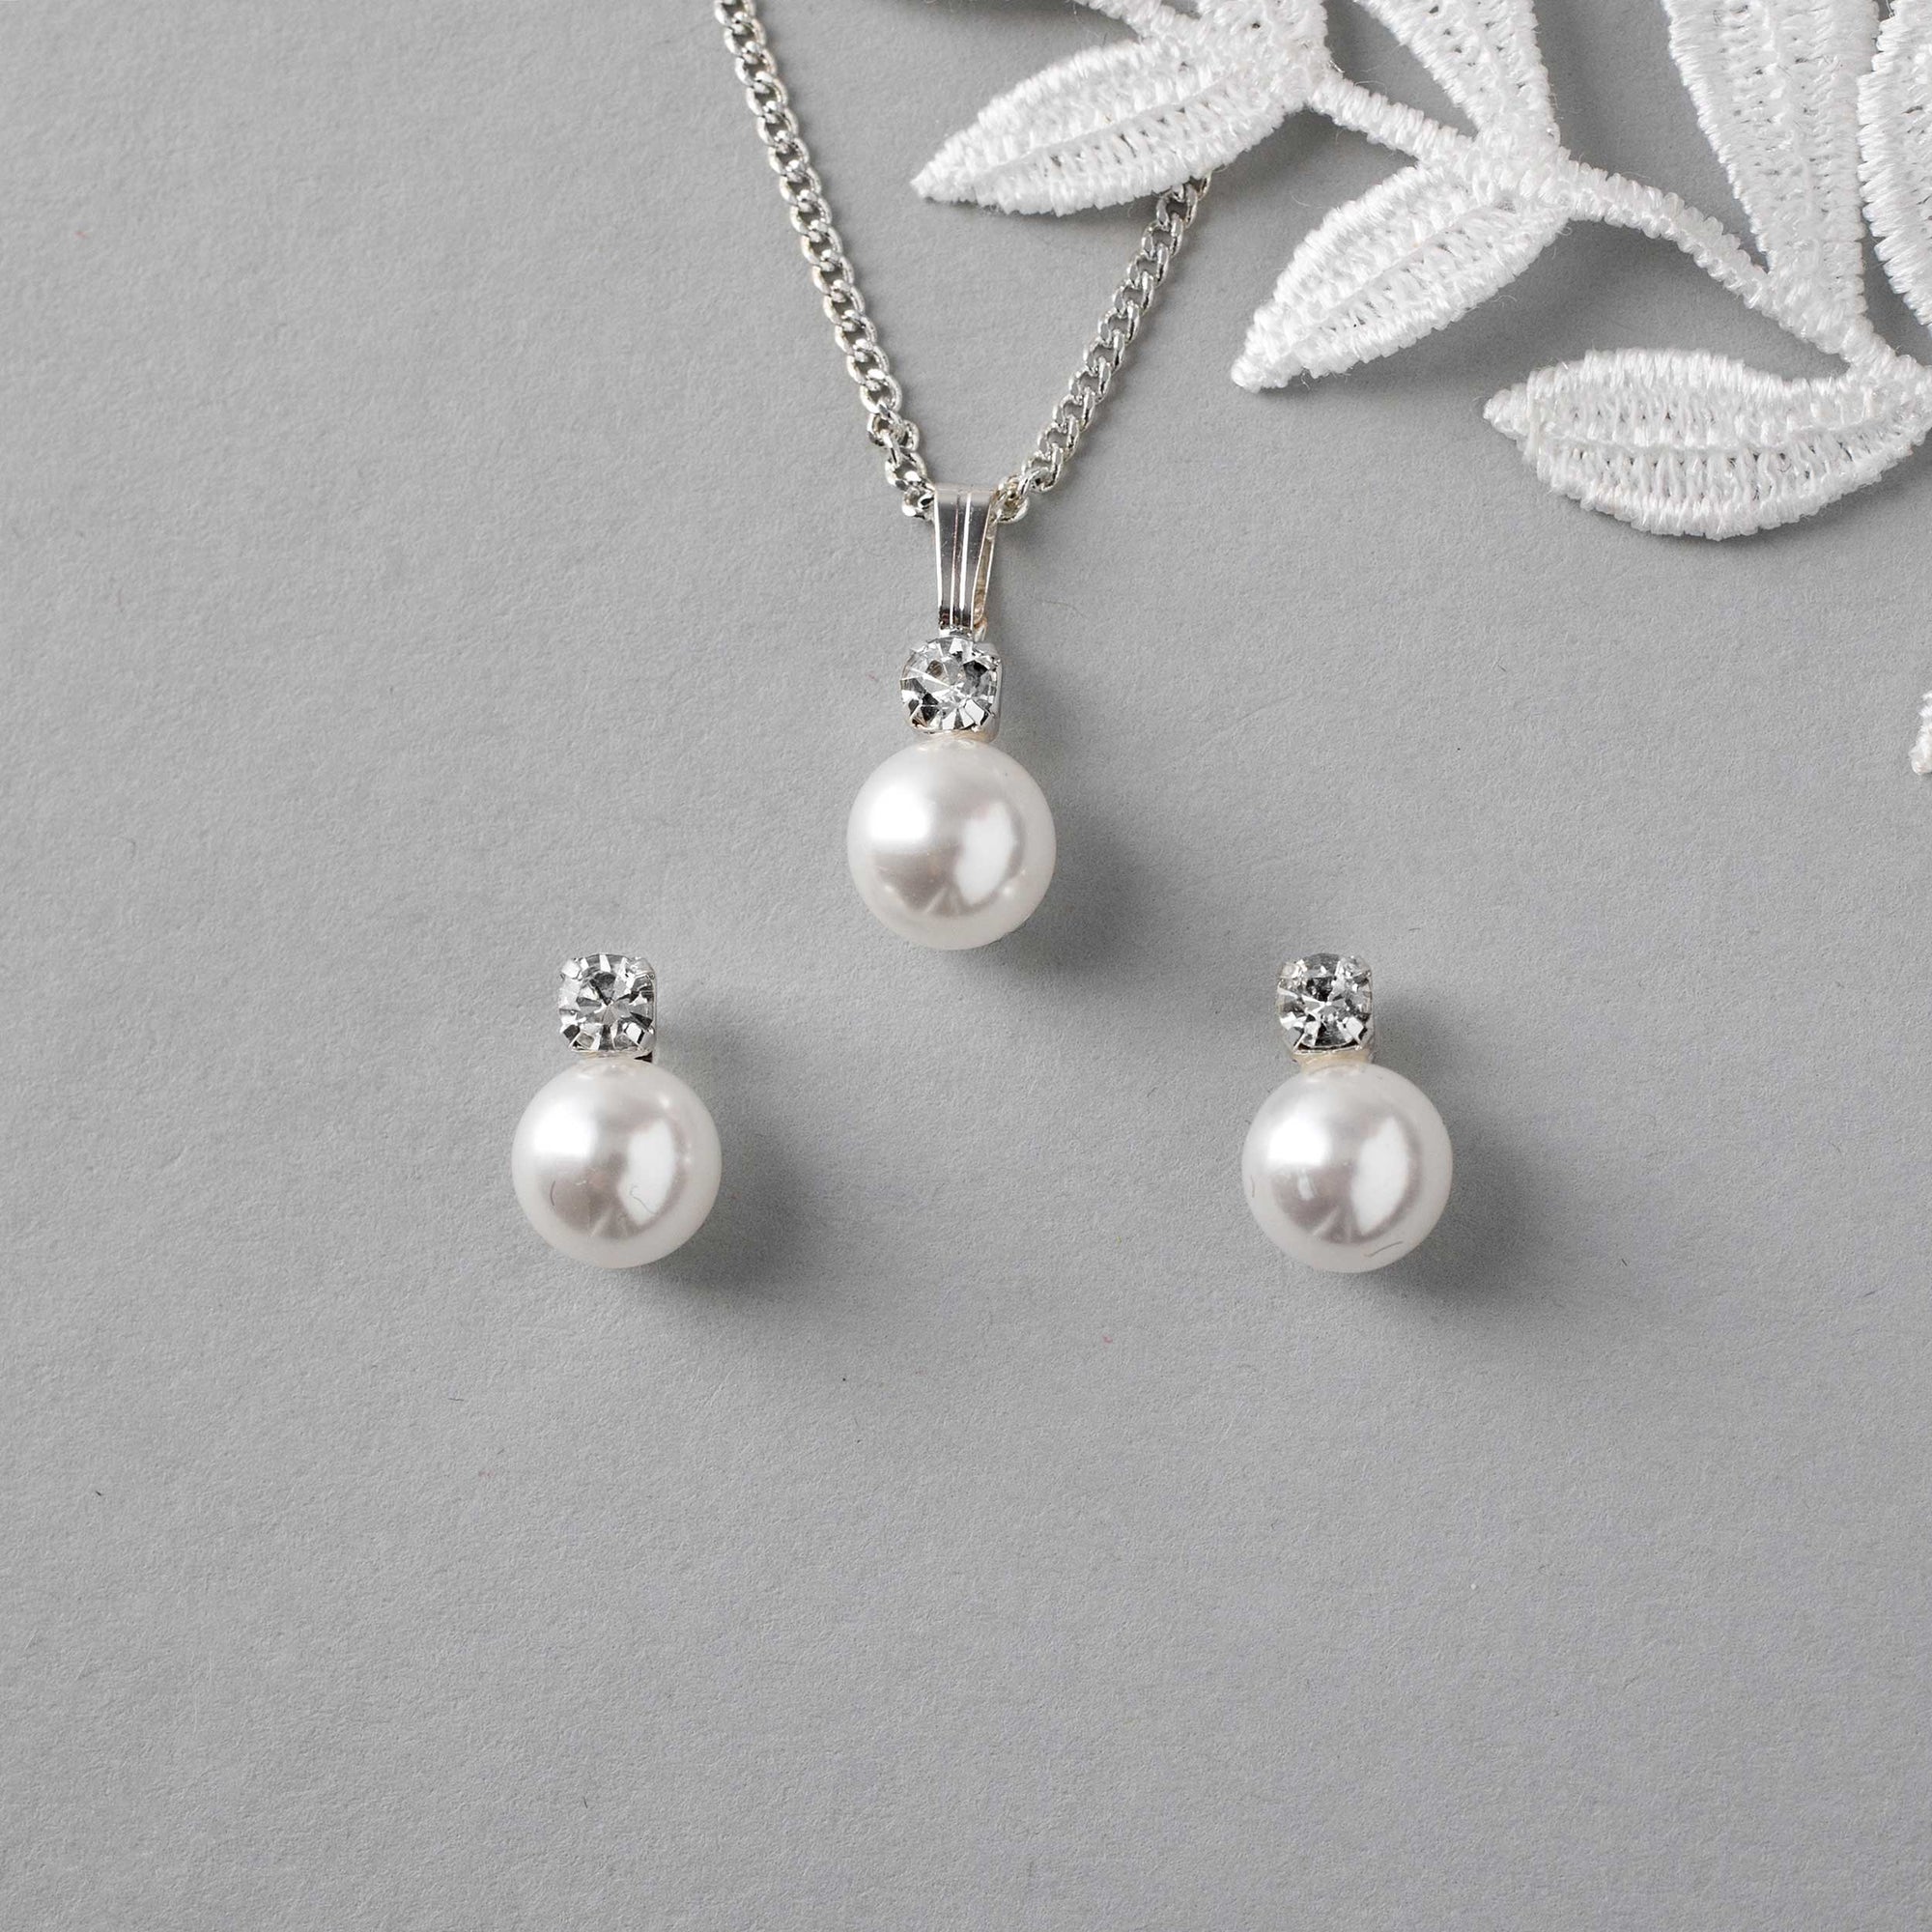 Classic White Pearl Necklace and Earrings